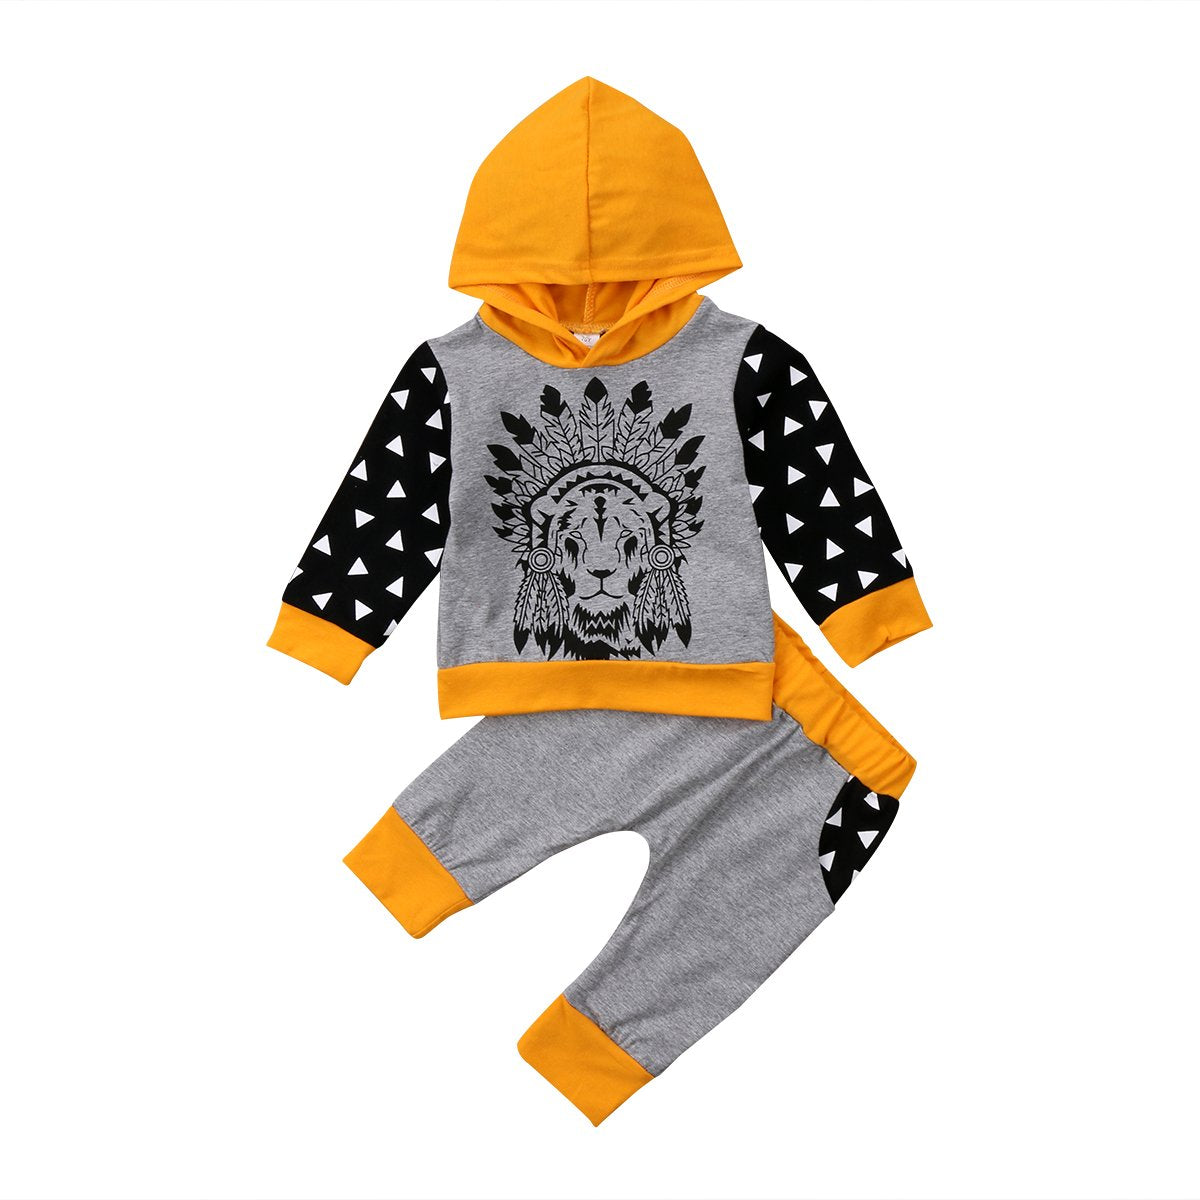 lion king baby boy clothes